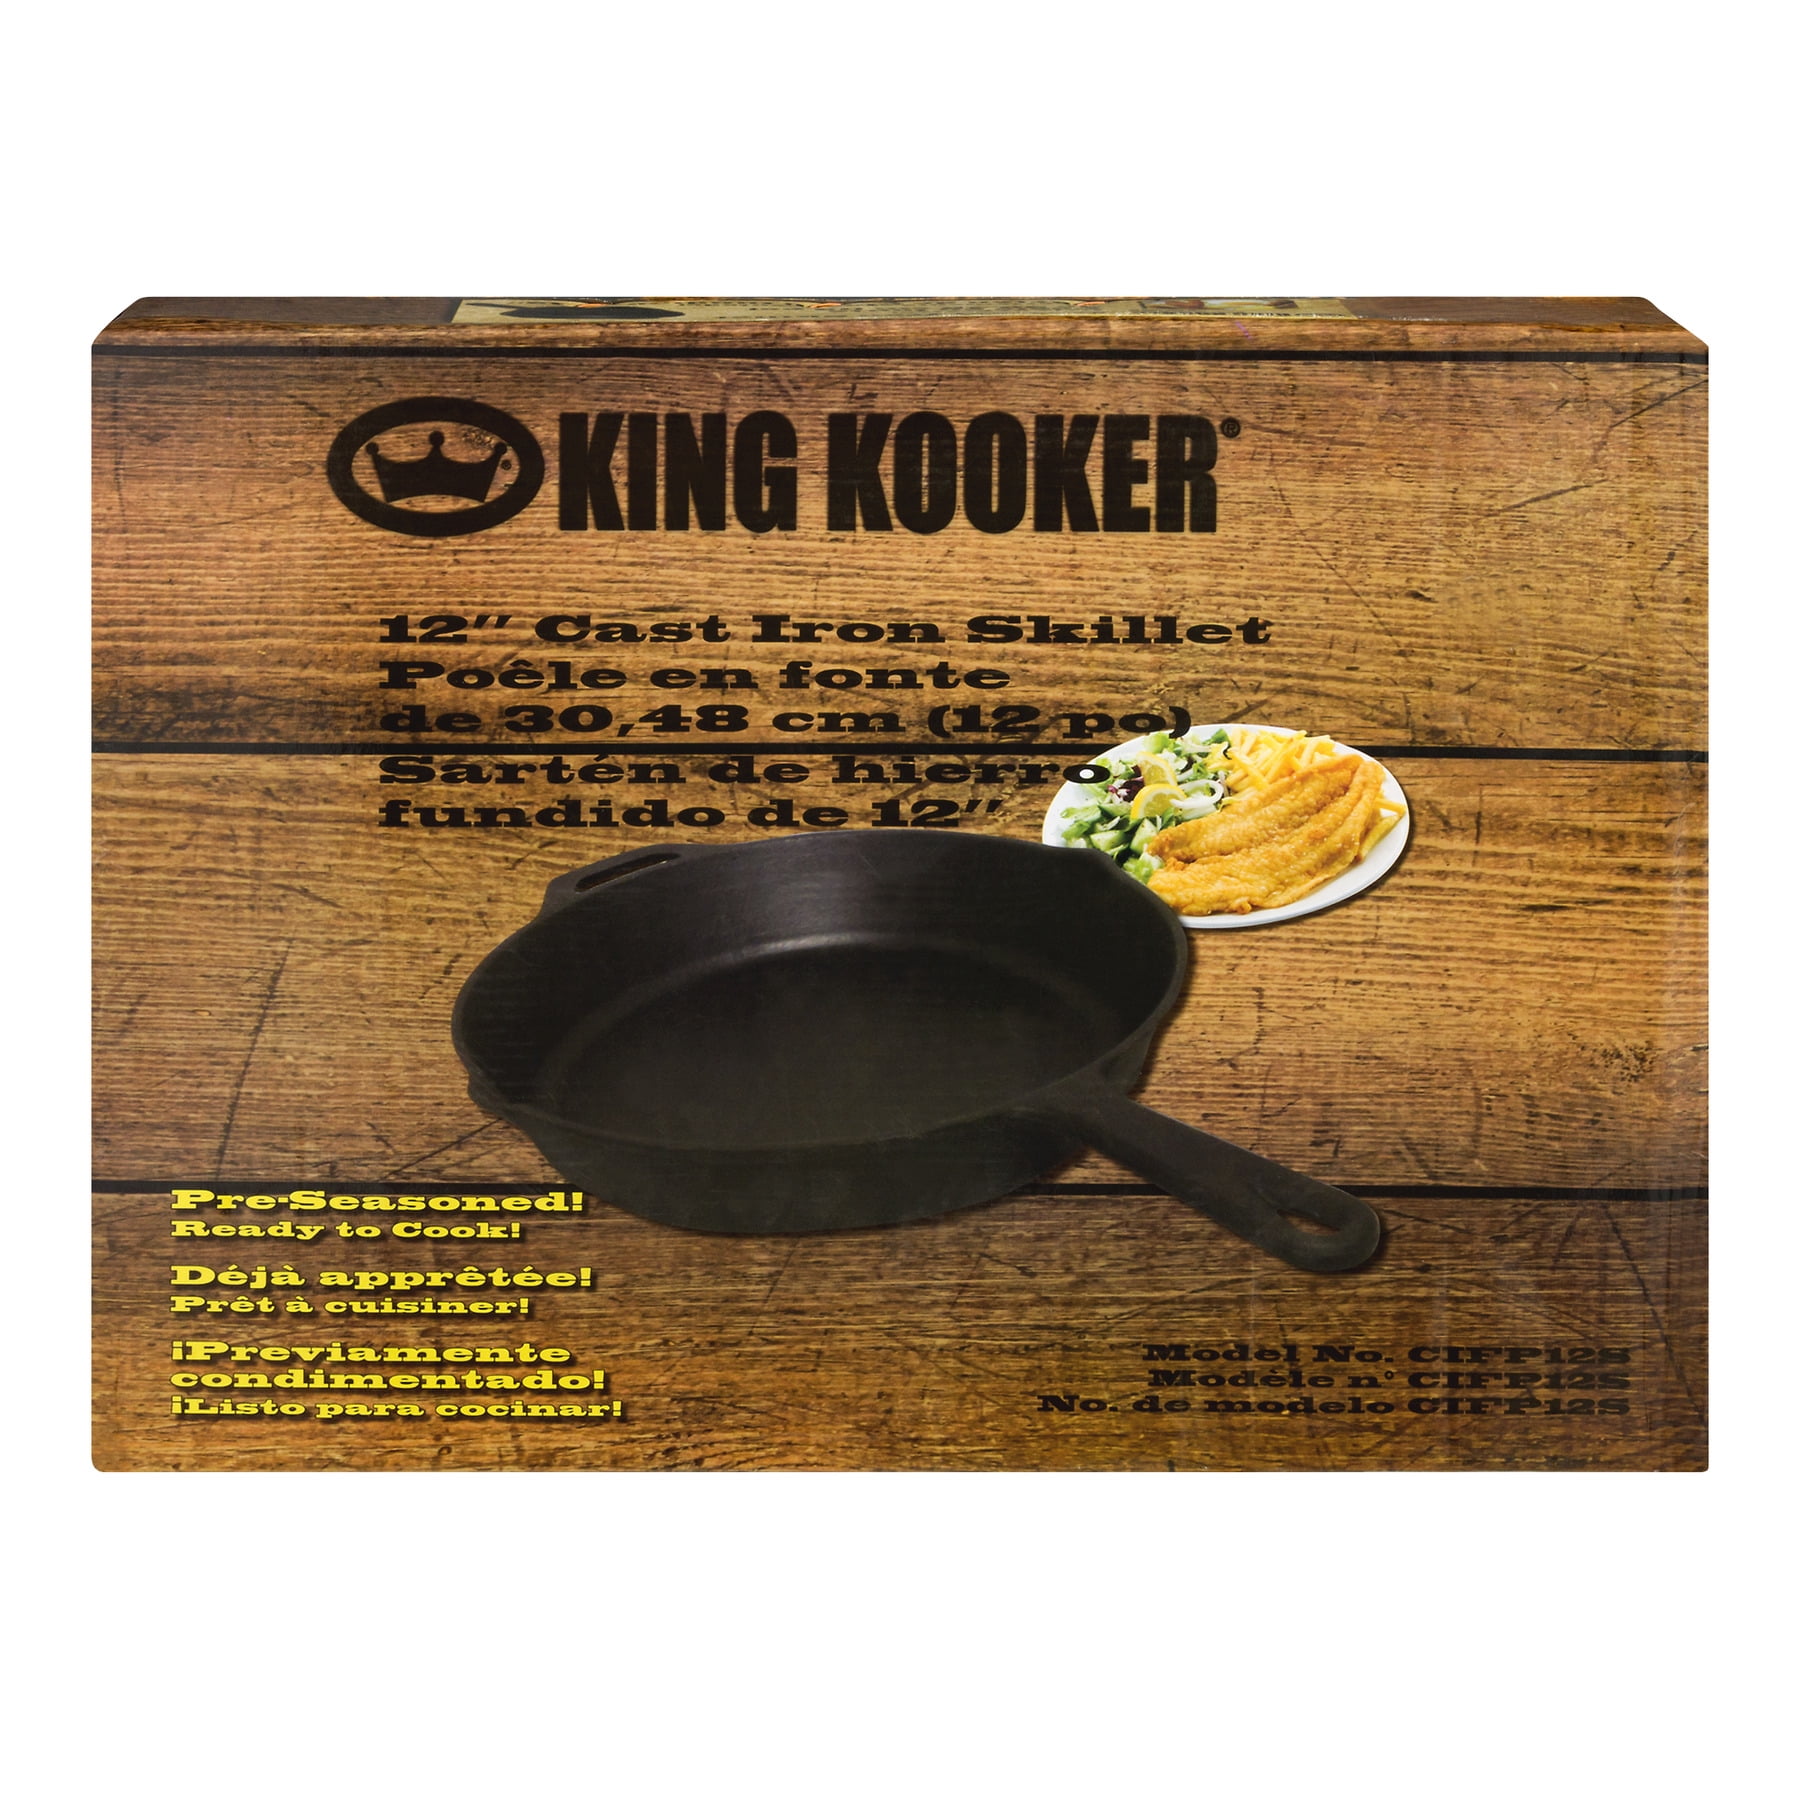 King Kooker Aluminum Fry Pan with Two Handles - 10 qt